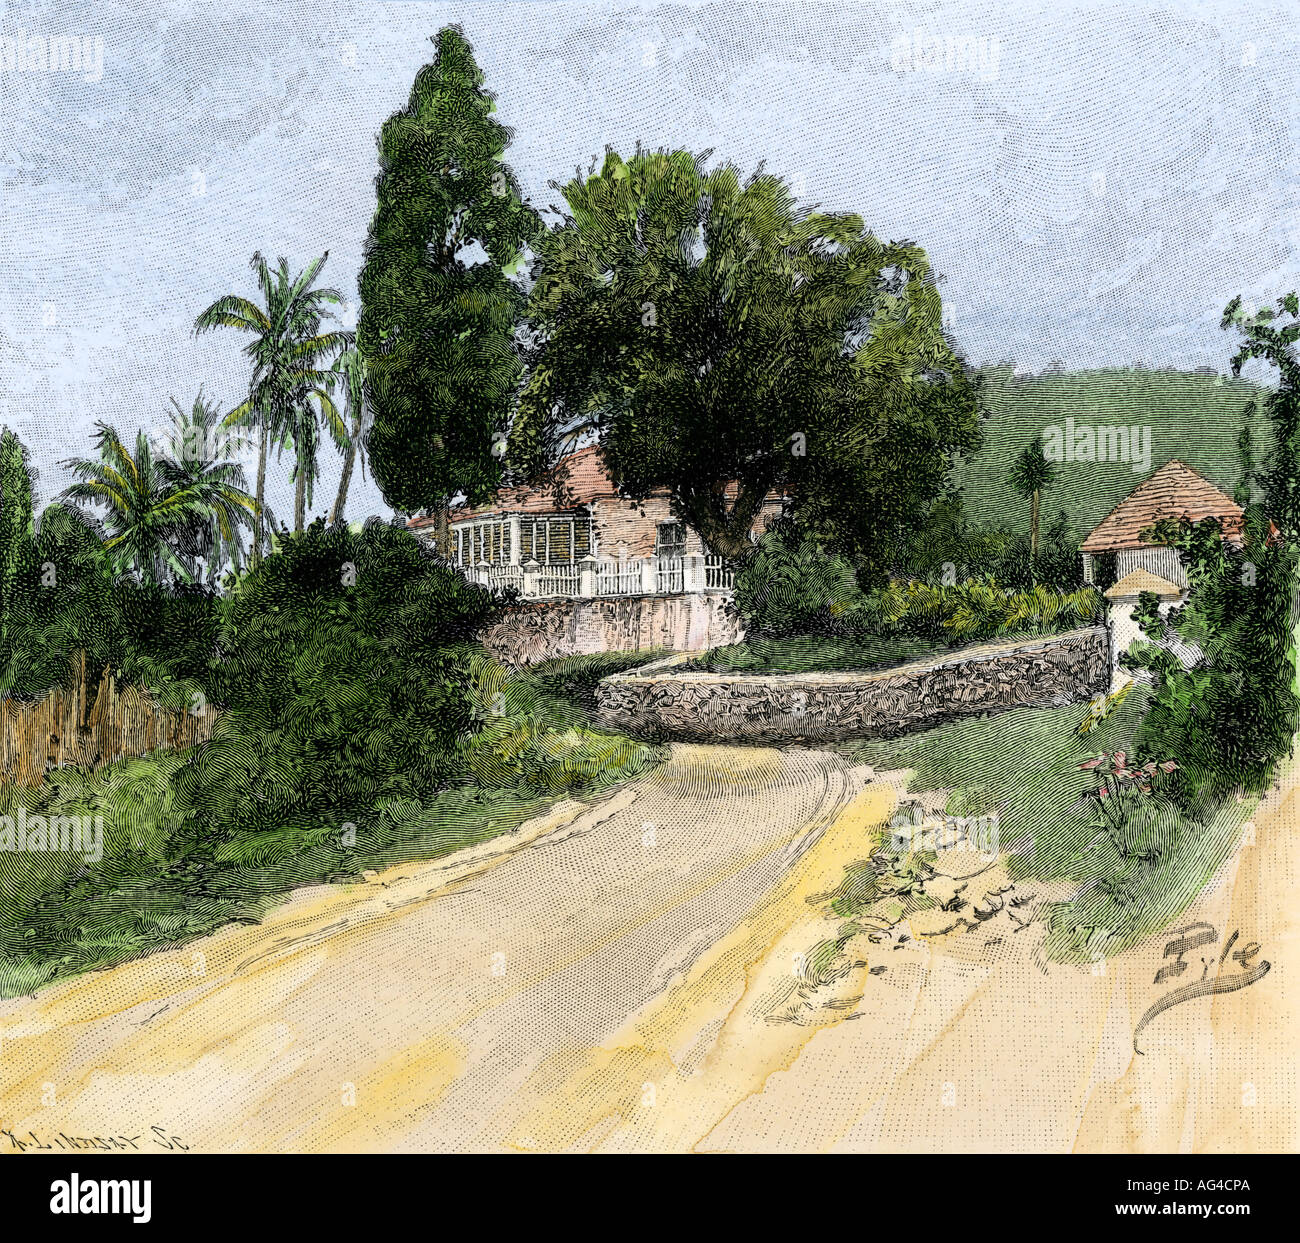 Jamaica plantation house from the roadside 1880s. Hand-colored halftone of an illustration Stock Photo